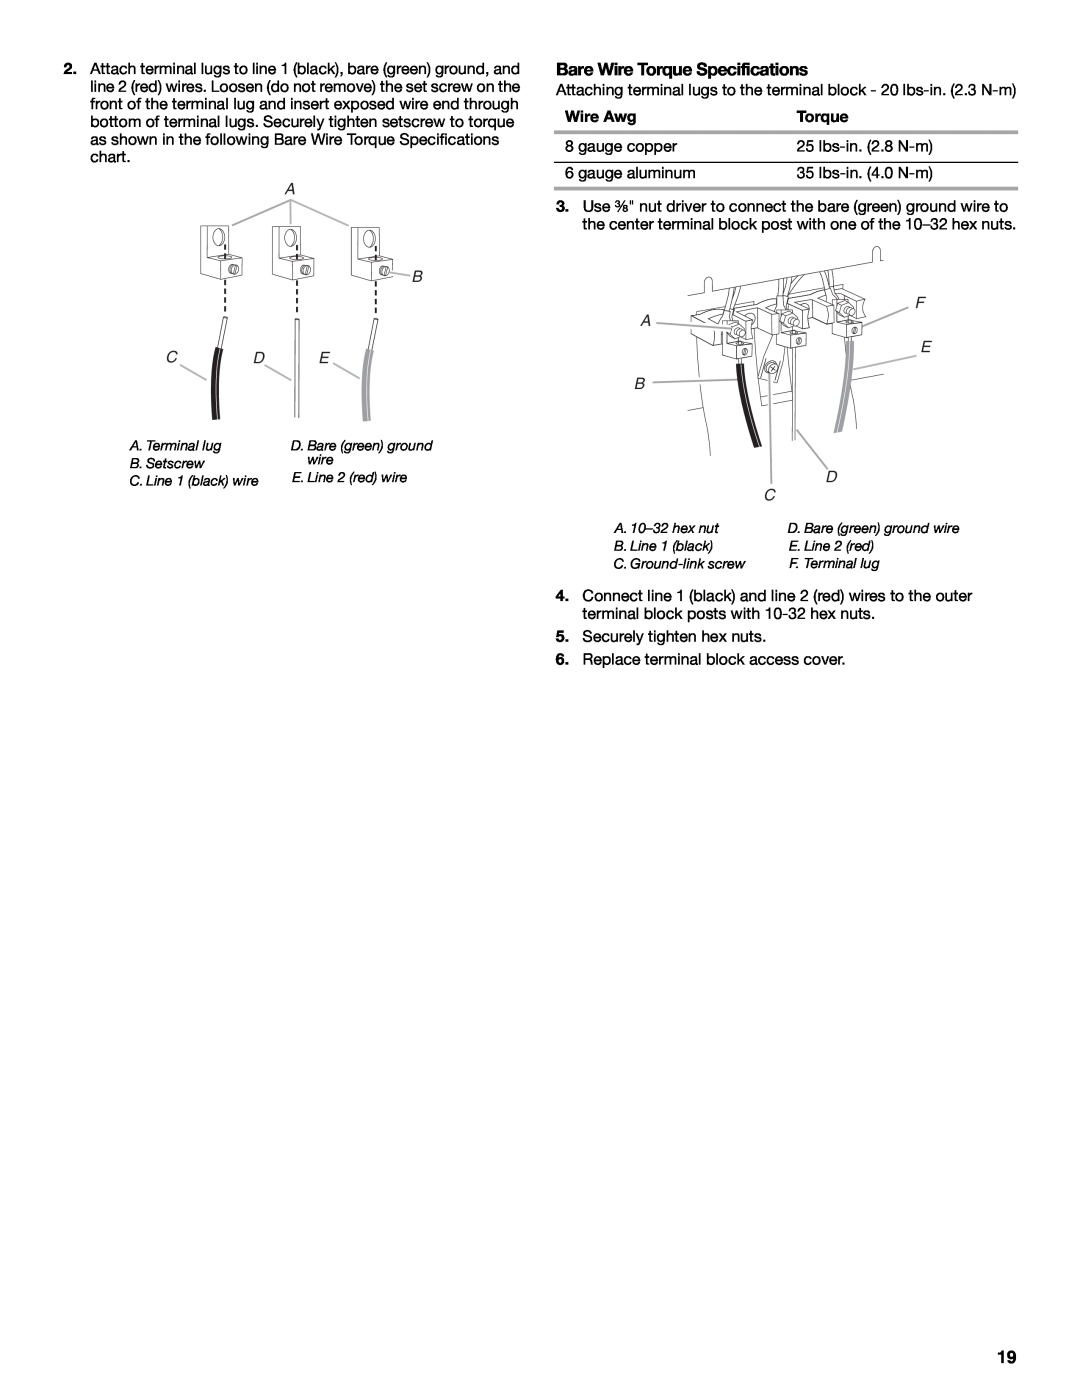 Jenn-Air W10430955A installation instructions Bare Wire Torque Specifications, A B C D E, gauge copper 